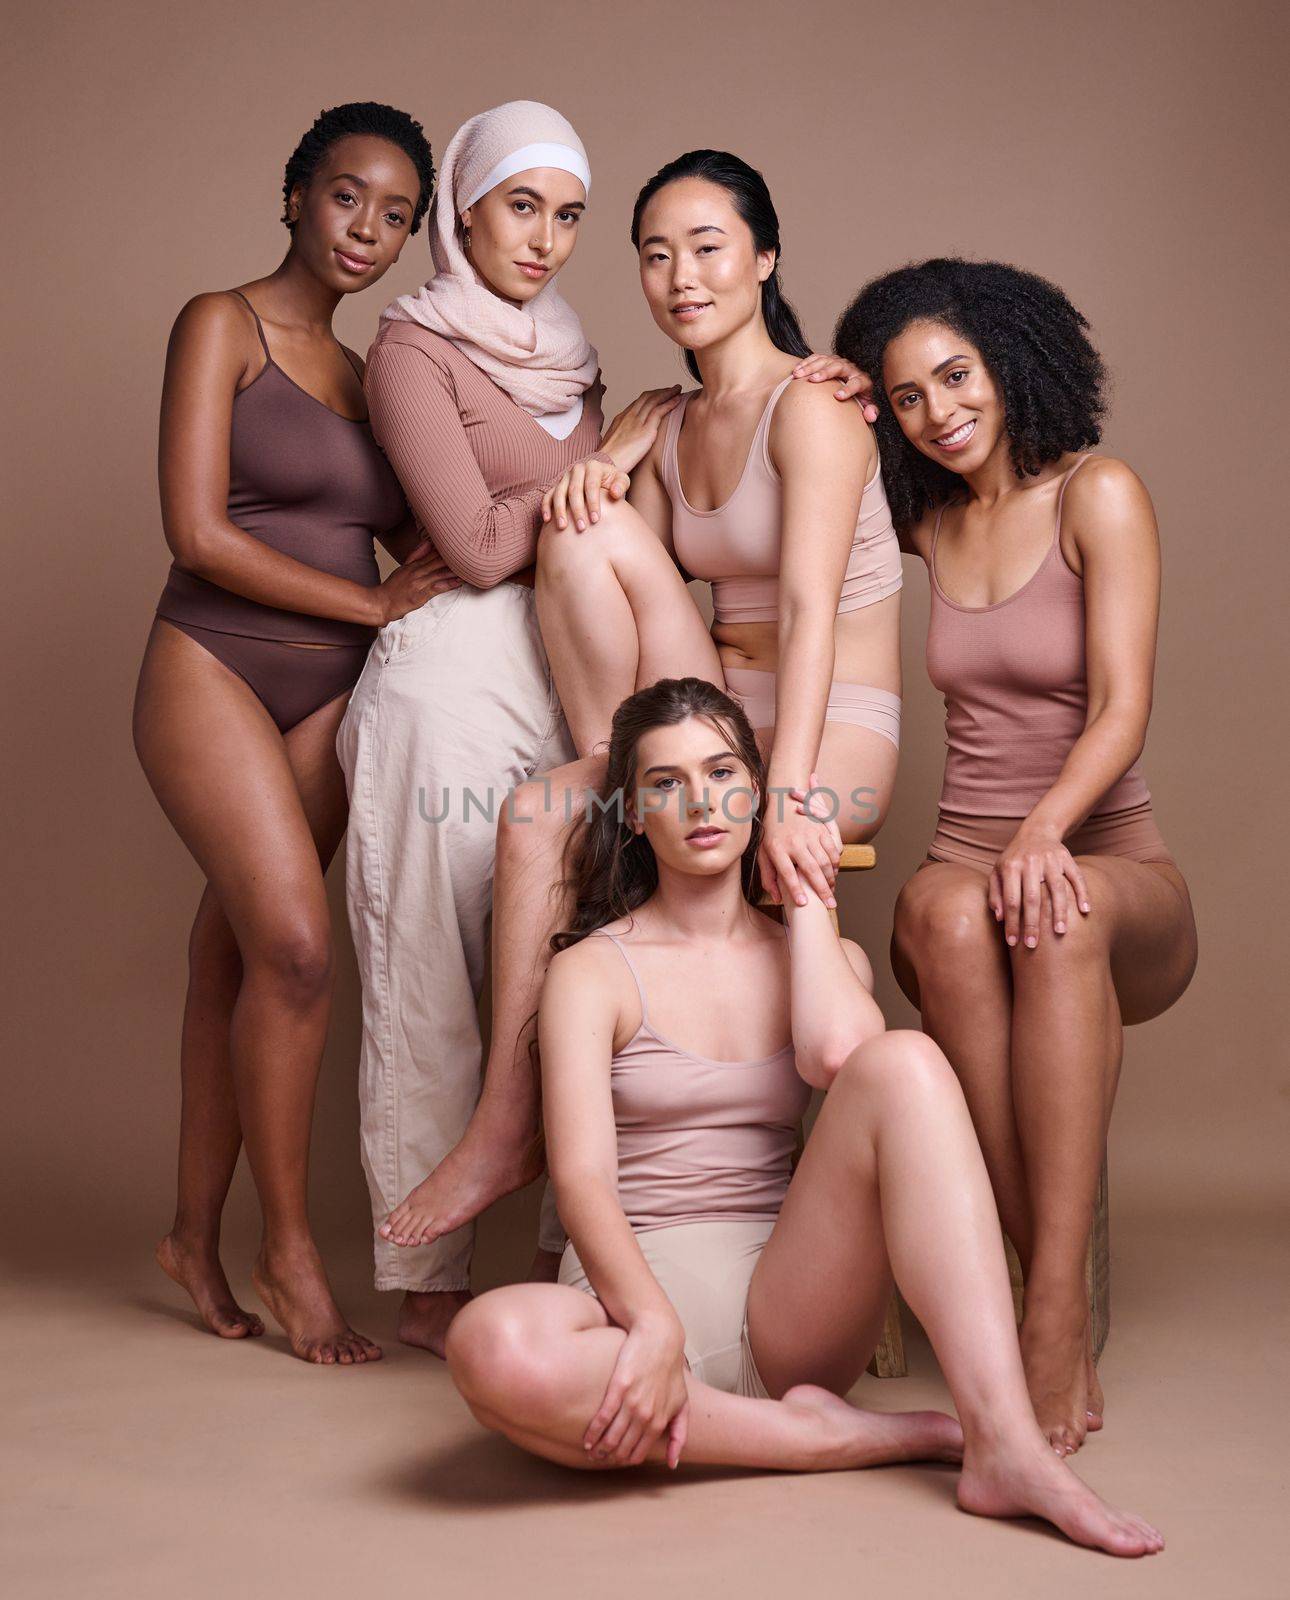 Women diversity, beauty and body while together for inclusion, skincare and different skin color portrait on studio for cosmetic and dermatology. Aesthetic model group with pride for body and culture.